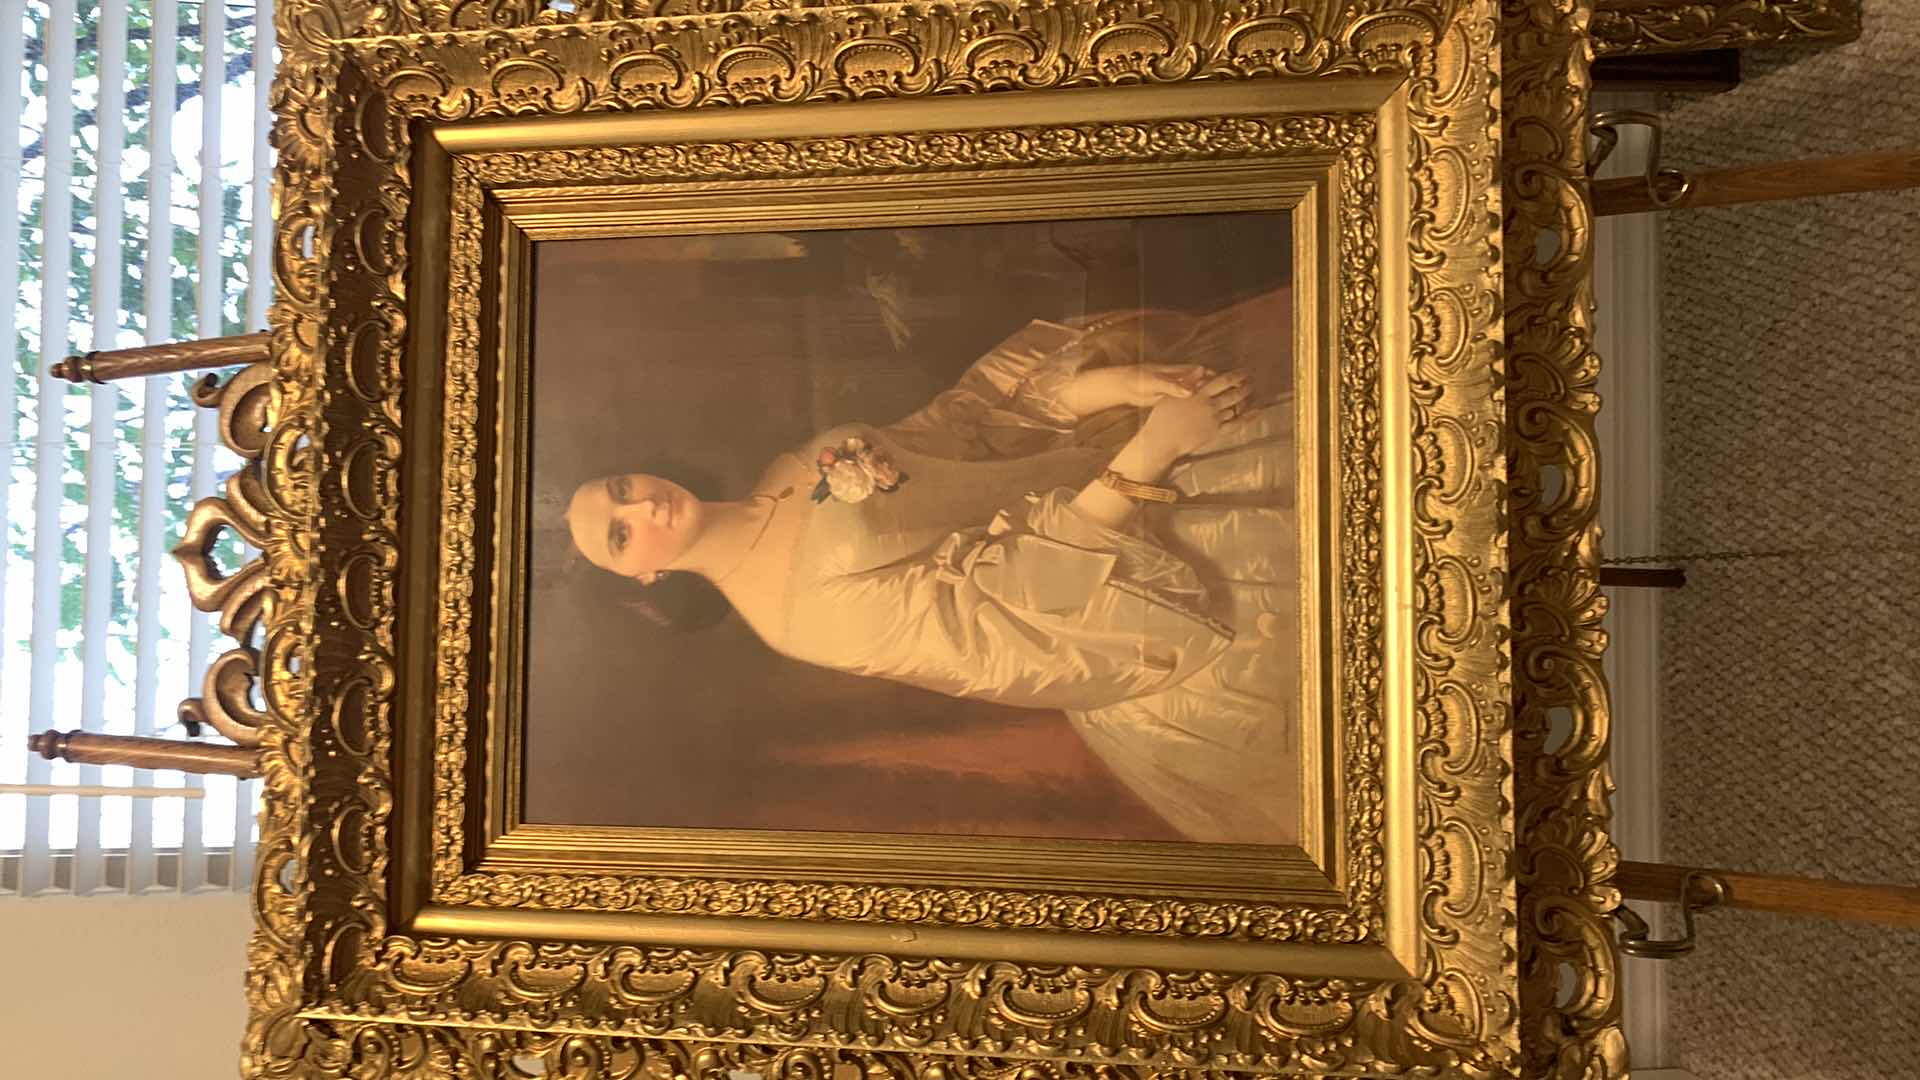 Photo 1 of A framed vintage reproduction of “Southern Belle” by Erich Correns:, Artist: Erich Correns ( 1821 - 1877) Munich, German München., Erich Correns ...
Priced without elaborate frame approx $1200 (stand not included)